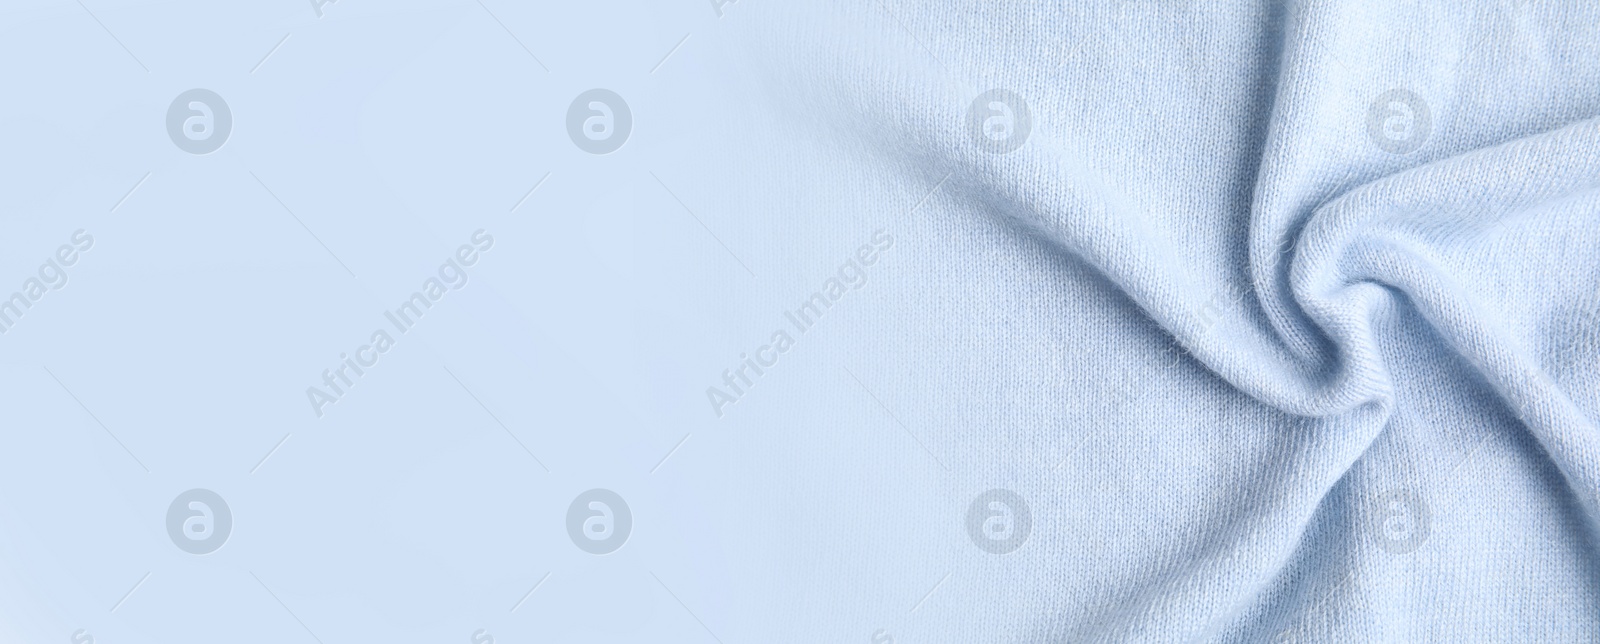 Image of Warm cashmere fabric as background, closeup view with space for text. Banner design